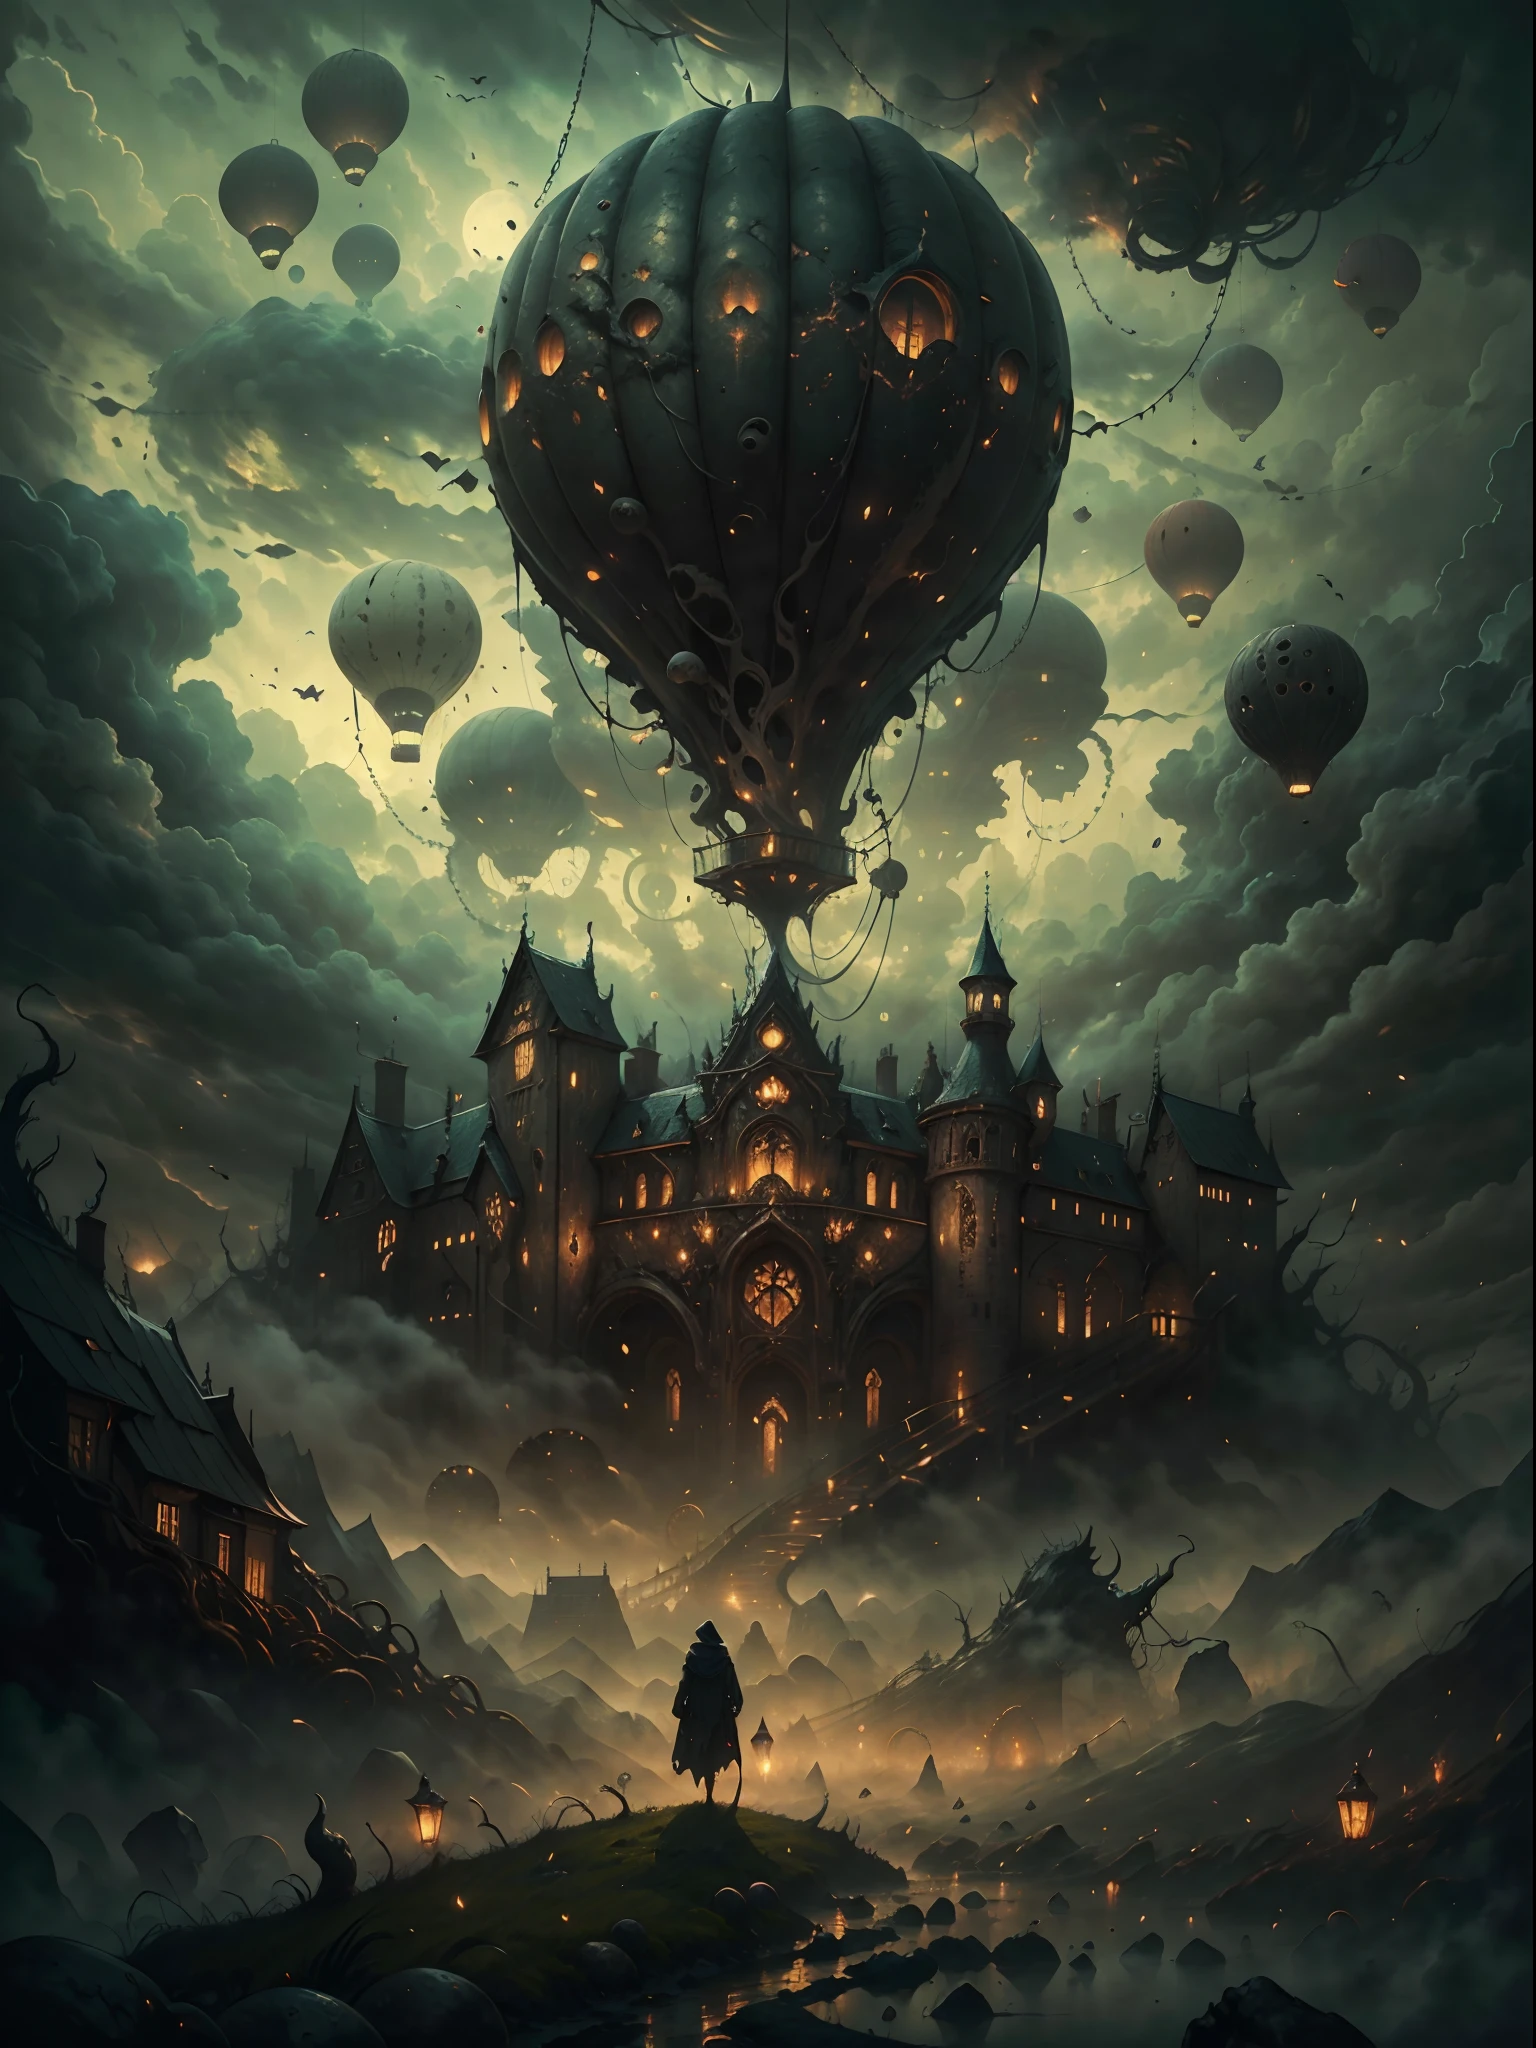 (best quality,highres,masterpiece:1.2),close shot image,giant hot air balloon,(HP.lovecraft style),(vivid colors,dark and mysterious atmosphere),ominous tentacles,floating in the sky,gloomy clouds,misty background,eerie lighting,lovecraftian details,elaborate design,attention to fine details,highly-detailed textures,menacing presence,otherworldly,unearthly landscape,disturbing beauty,intense atmosphere,magical realism,subtle surrealism,ethereal feeling,nostalgic elements,unusual perspective,dark fantasy,gothic horror elements,hauntingly beautiful composition,whimsical yet foreboding ambiance,labyrinthine structures,mysterious symbols,shadows and silhouettes,majestic and intimidating,awe-inspiring,grandiose scale,awe-inducing,sublime and surreal,spellbinding,mesmerizing and evocative.